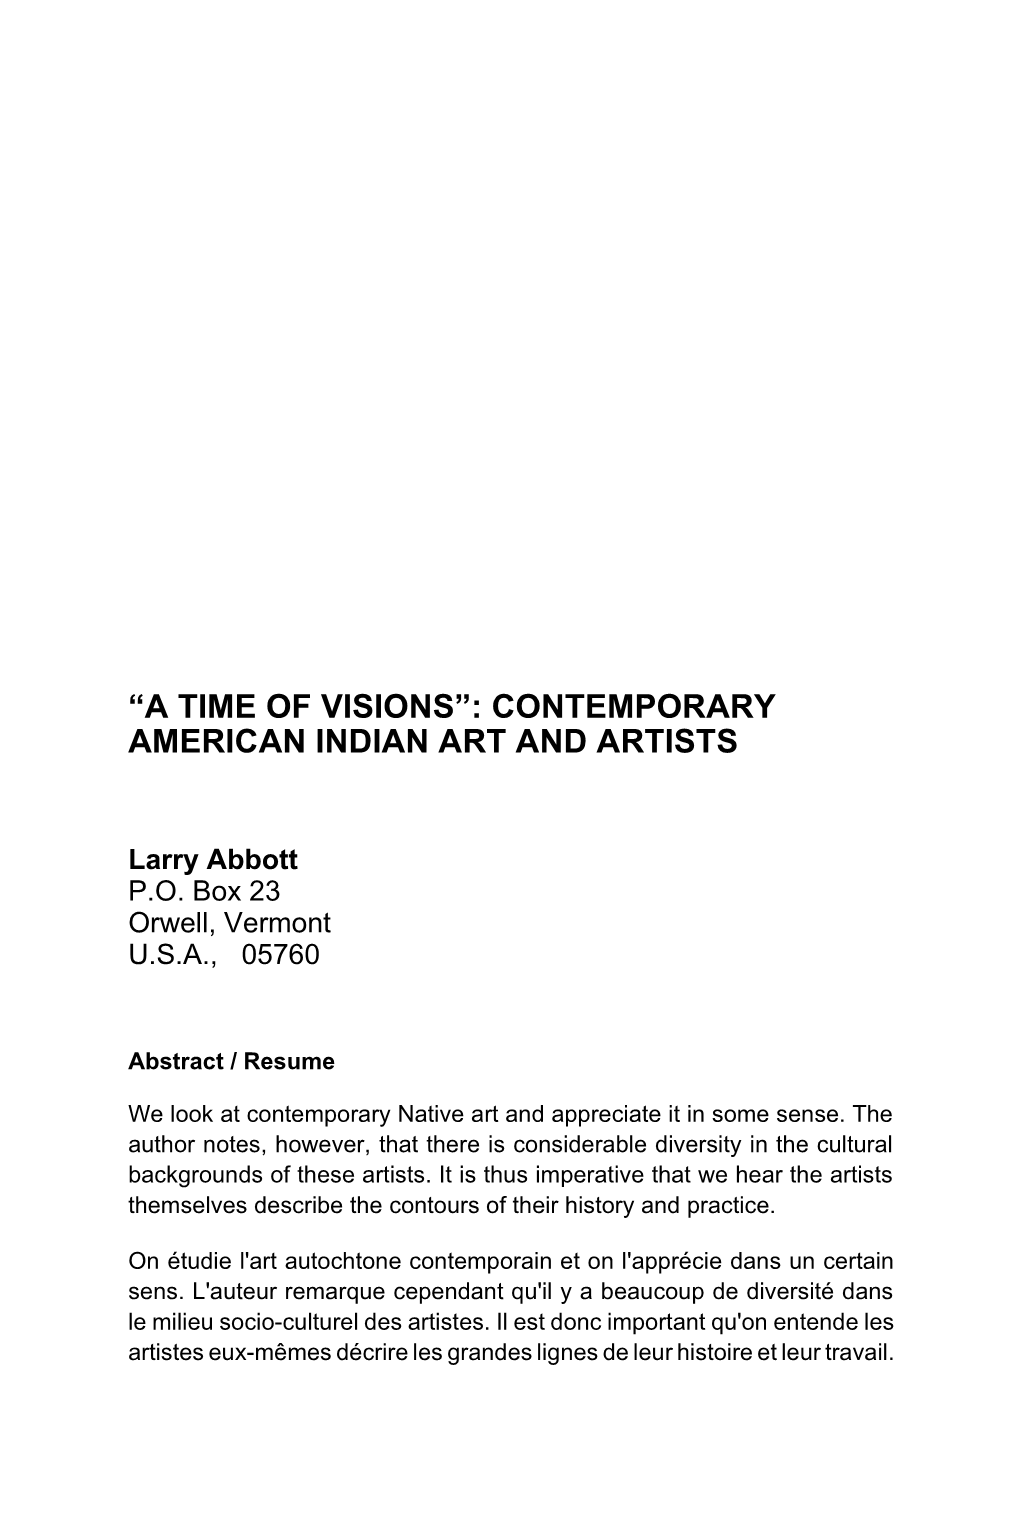 Contemporary American Indian Art and Artists